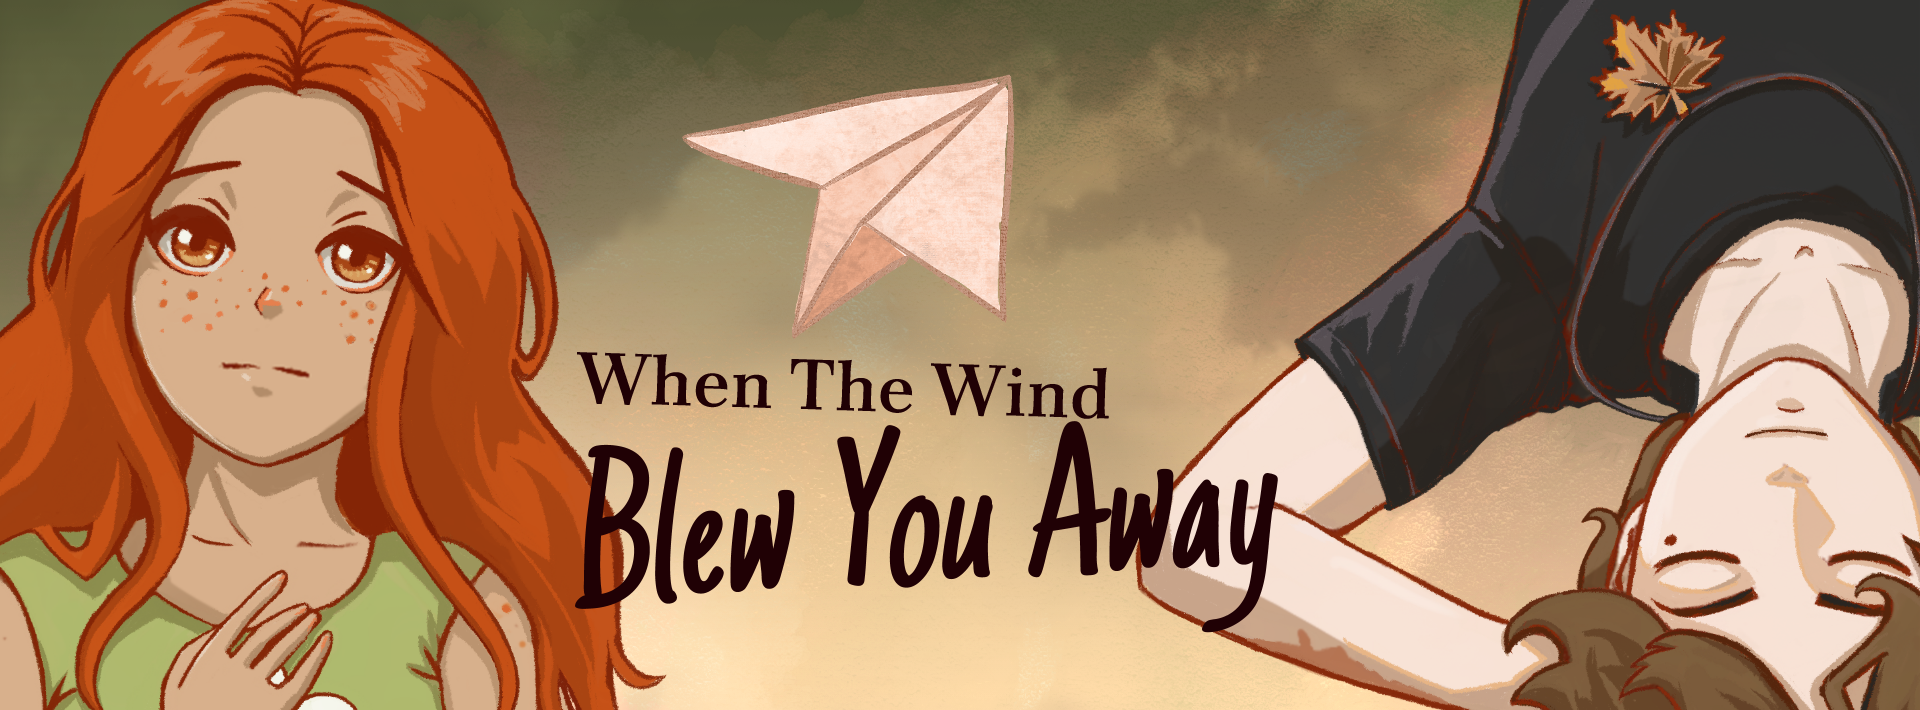 When The Wind Blew You Away